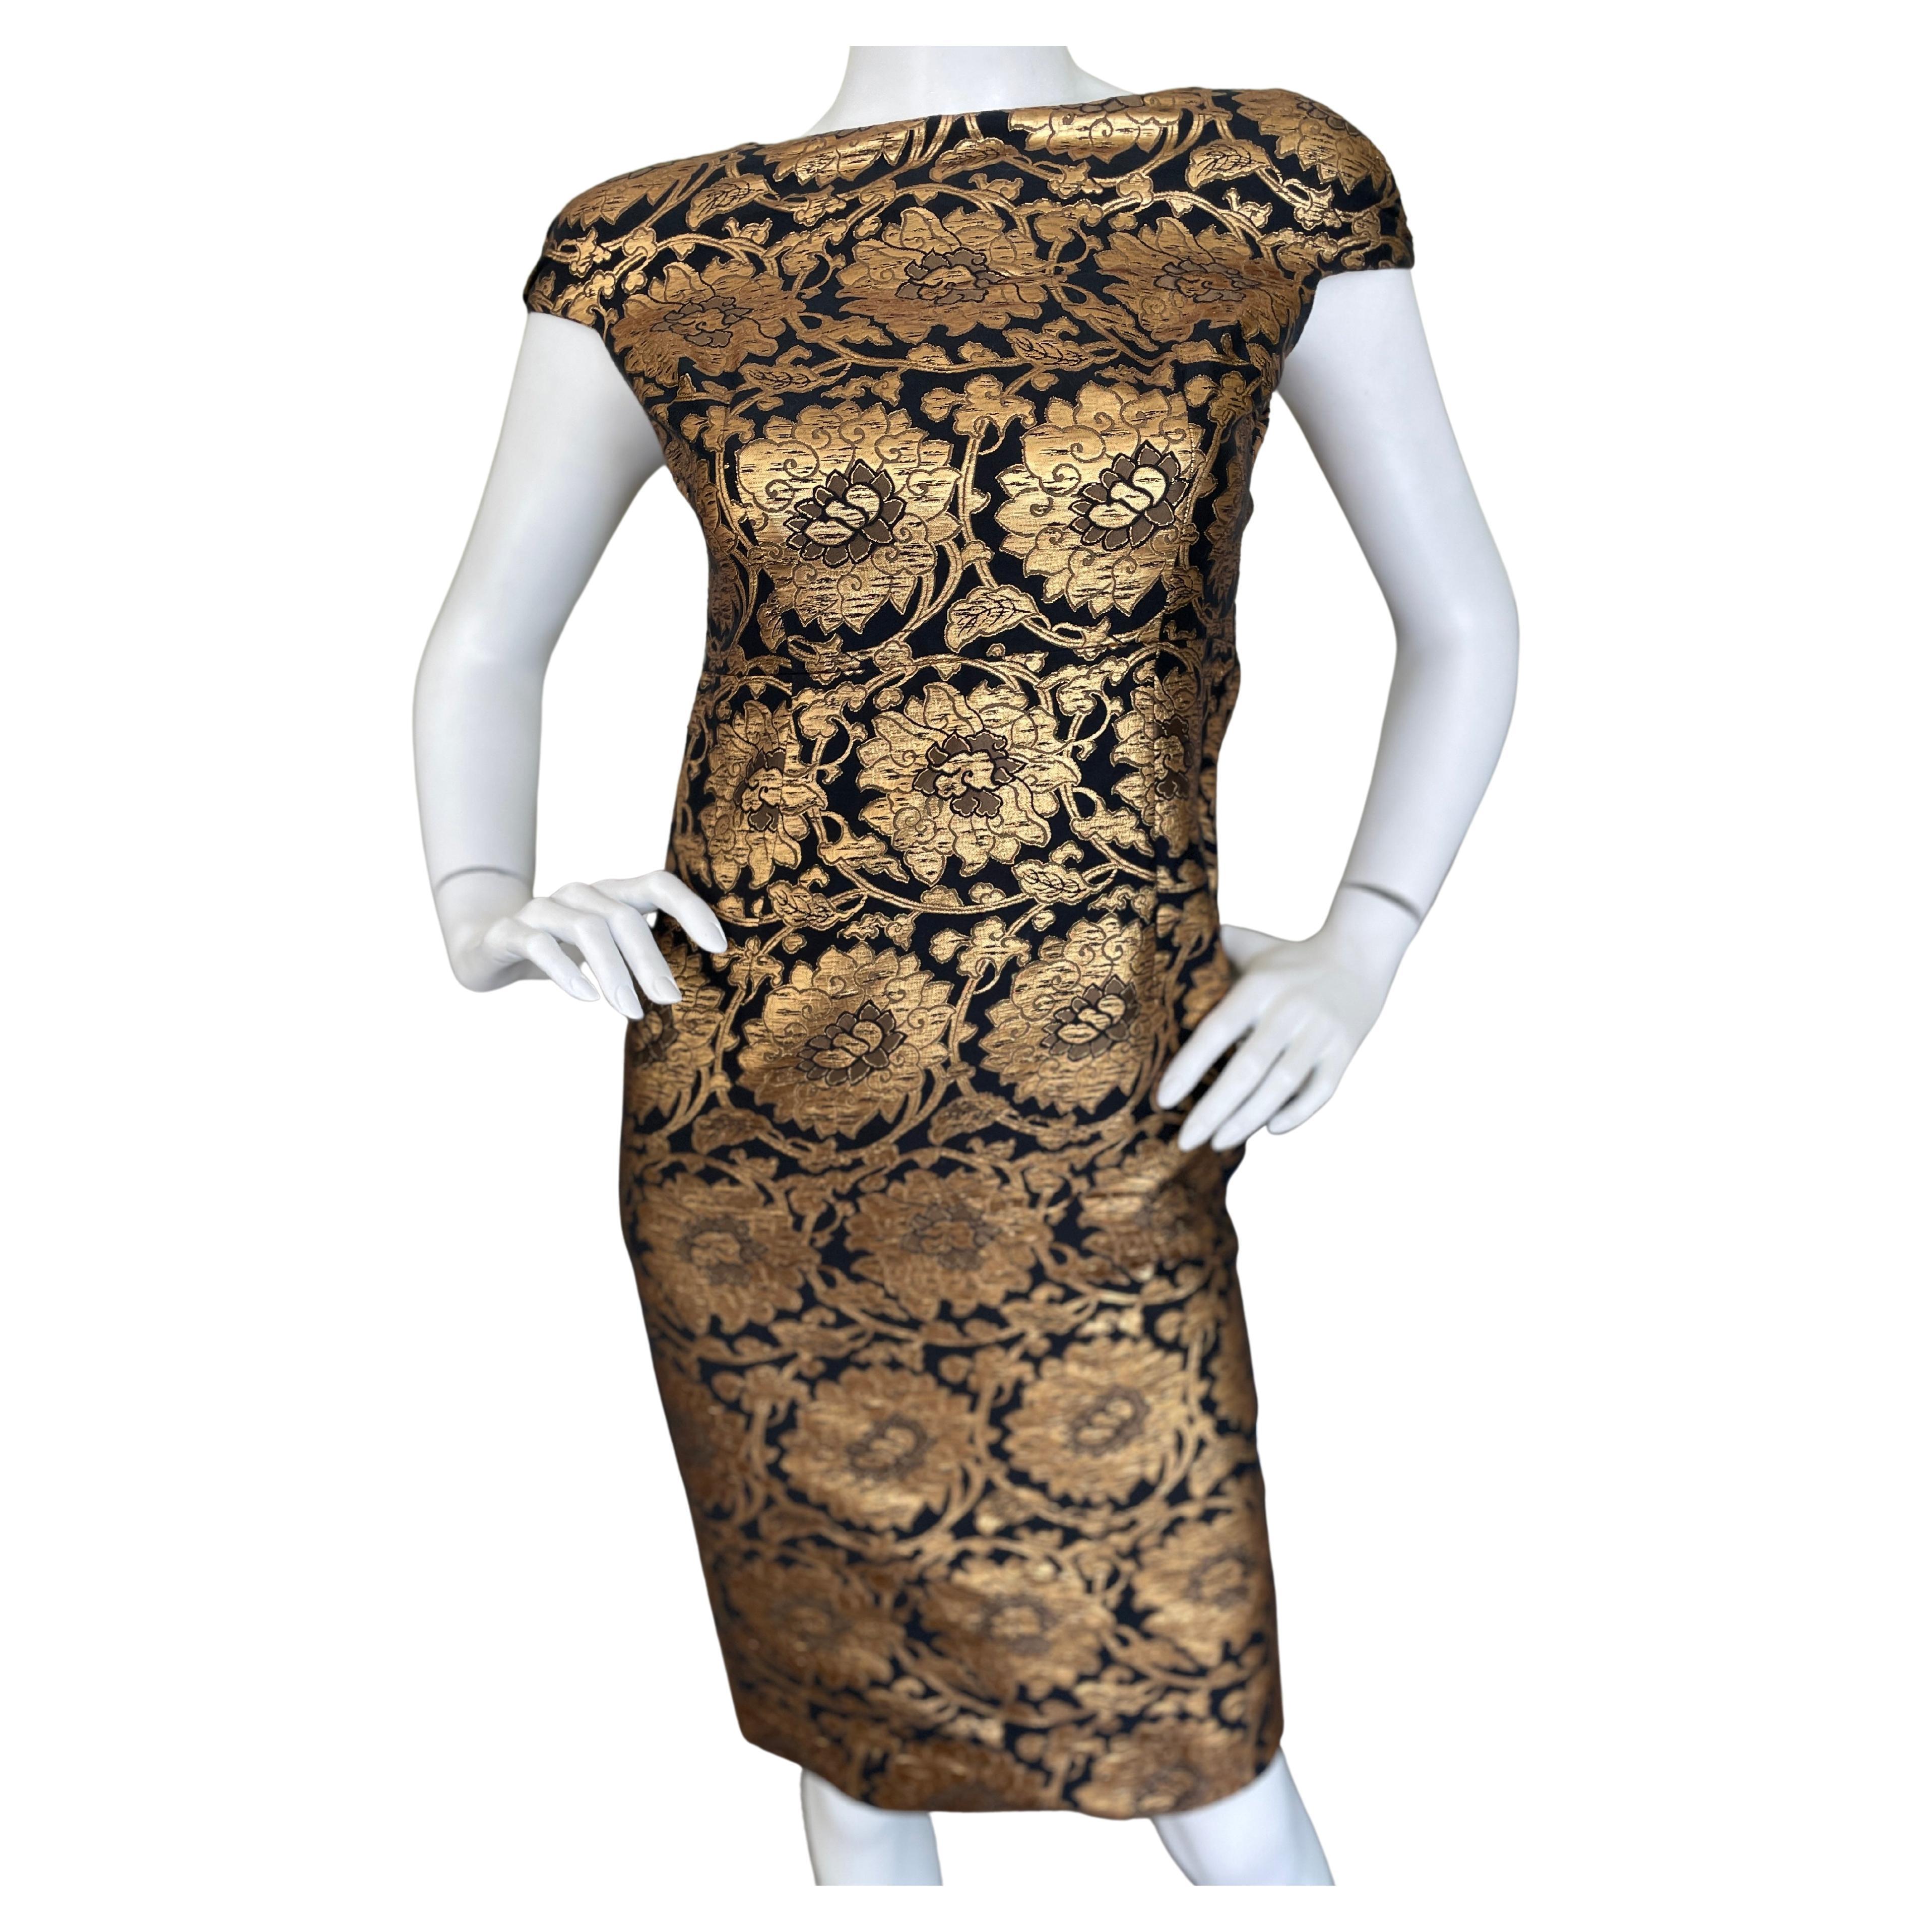 Christian Dior by John Galliano Gold Brocade Cocktail Dress From Fall 2009 For Sale